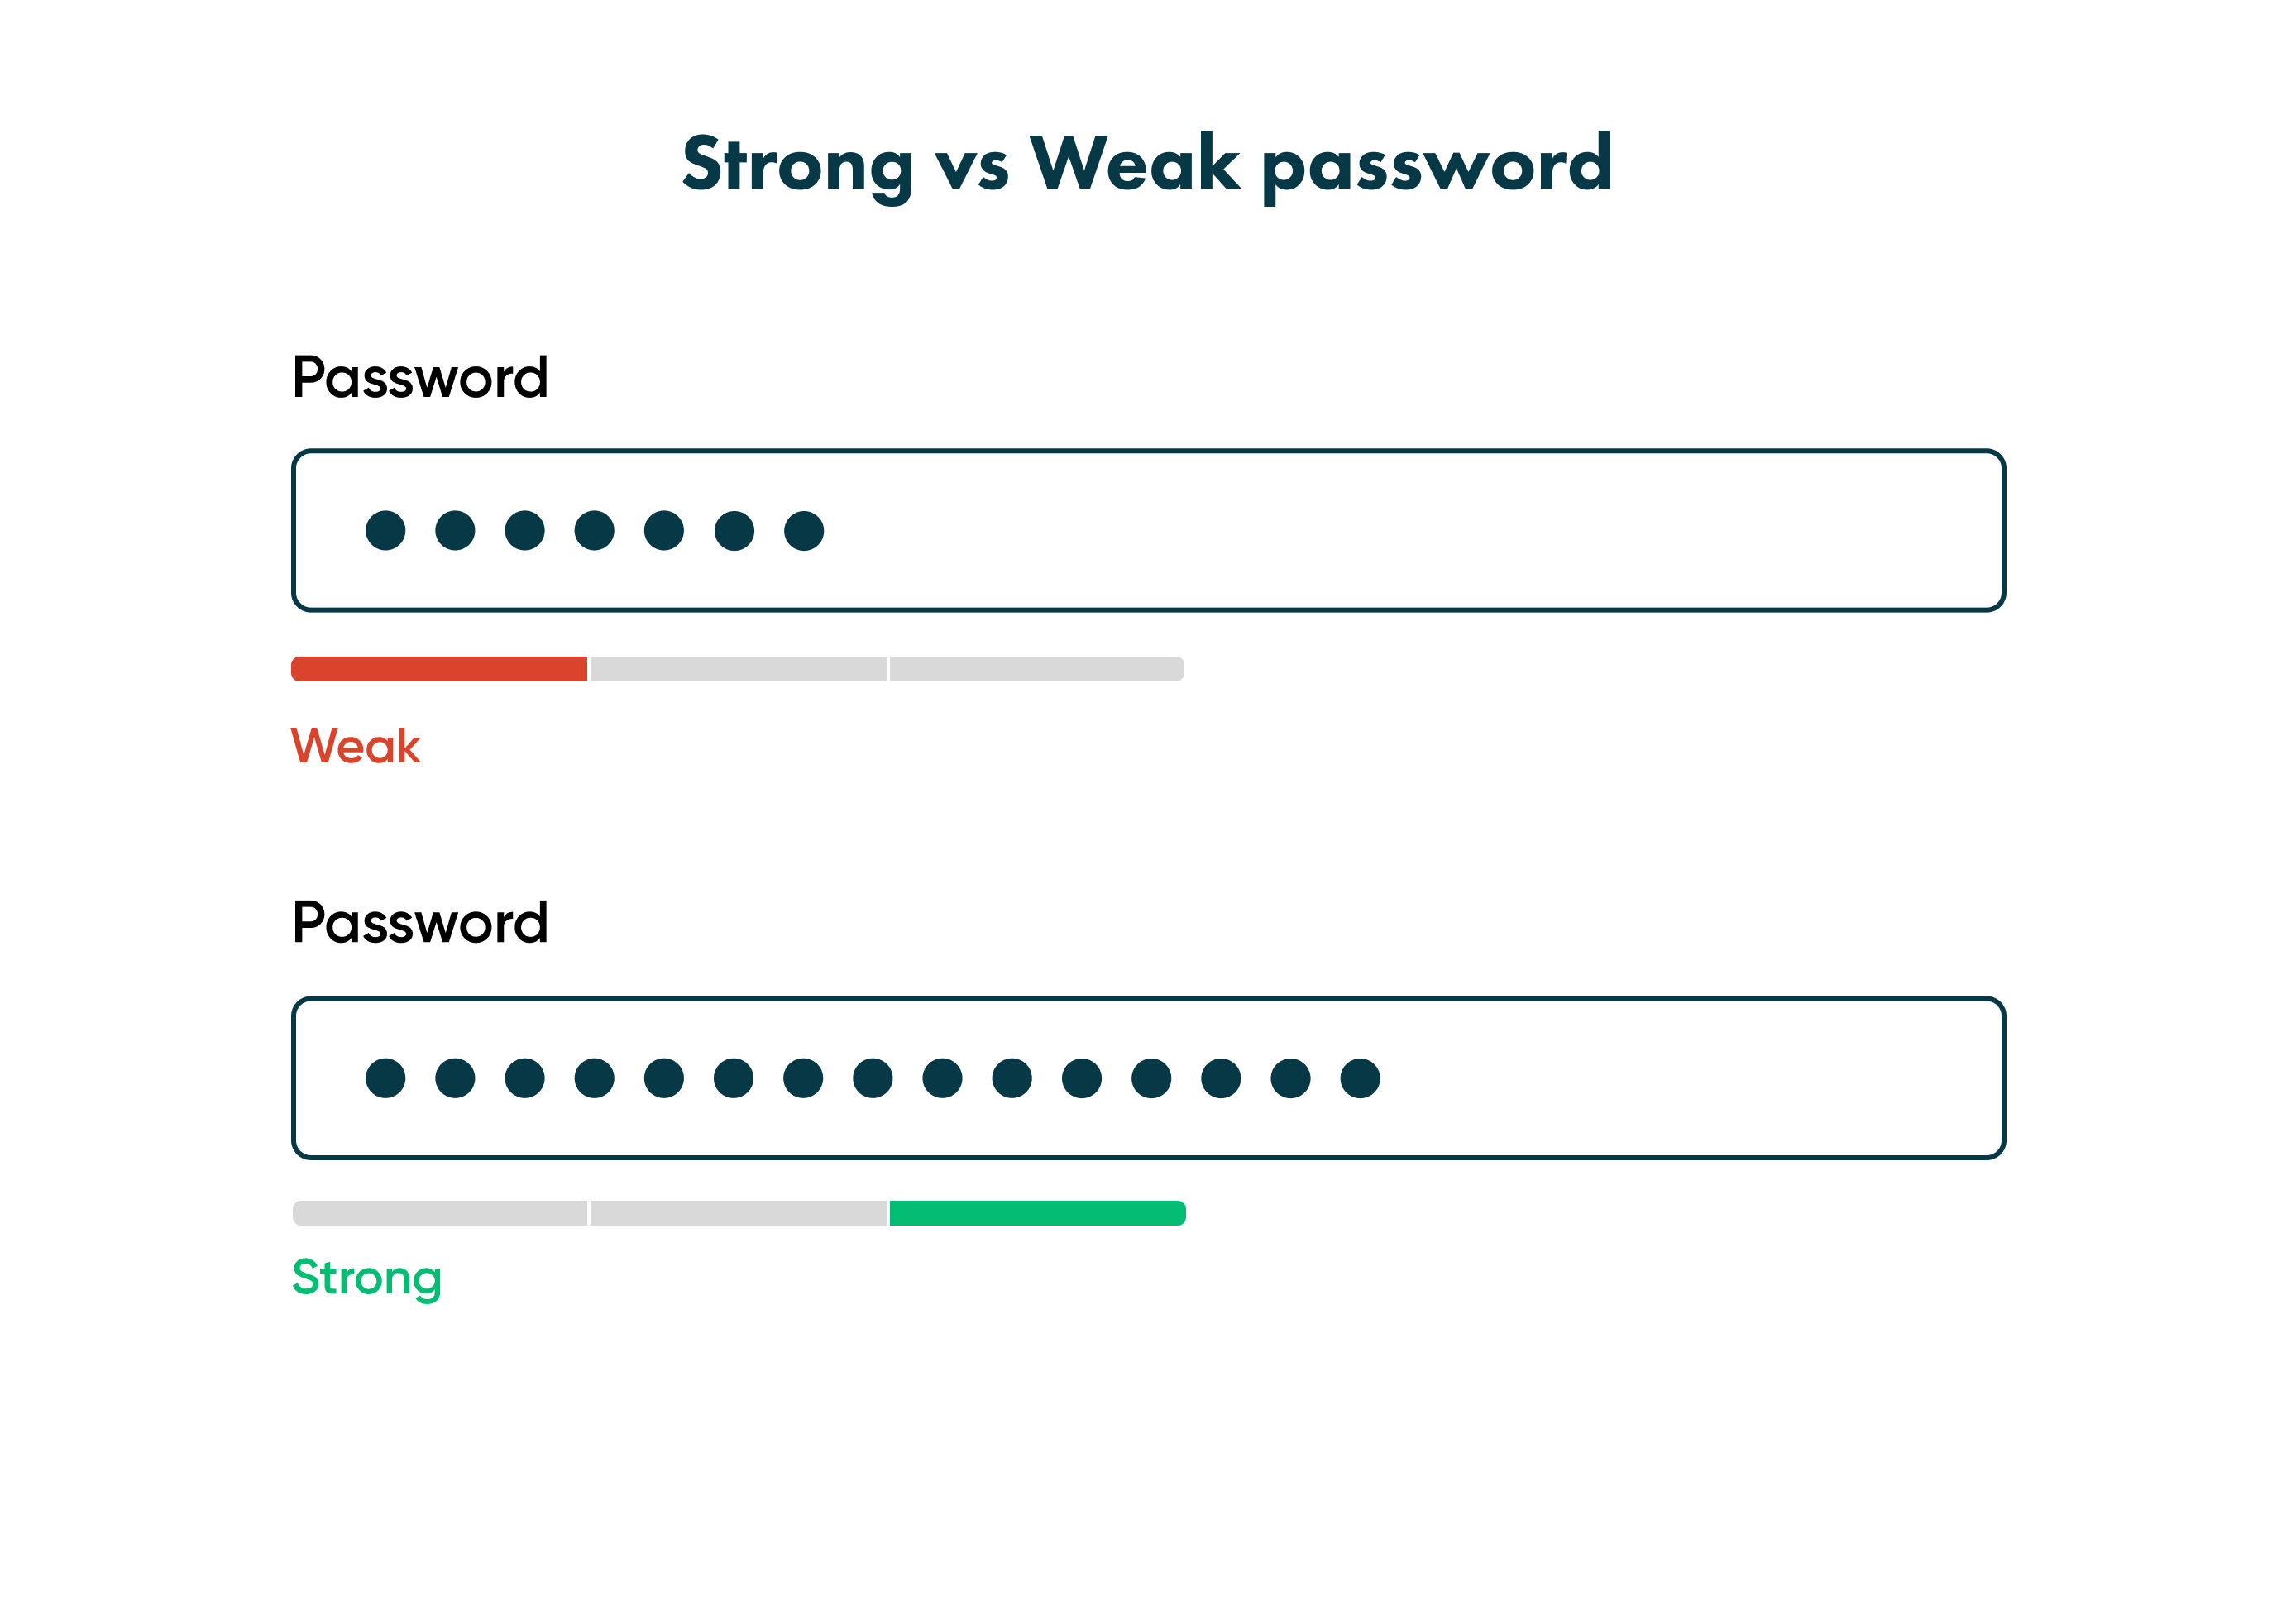 Having a weak password policy, or even no policy at all, could lead to major issues in the future. It is best to have a strong password policy for all employees.